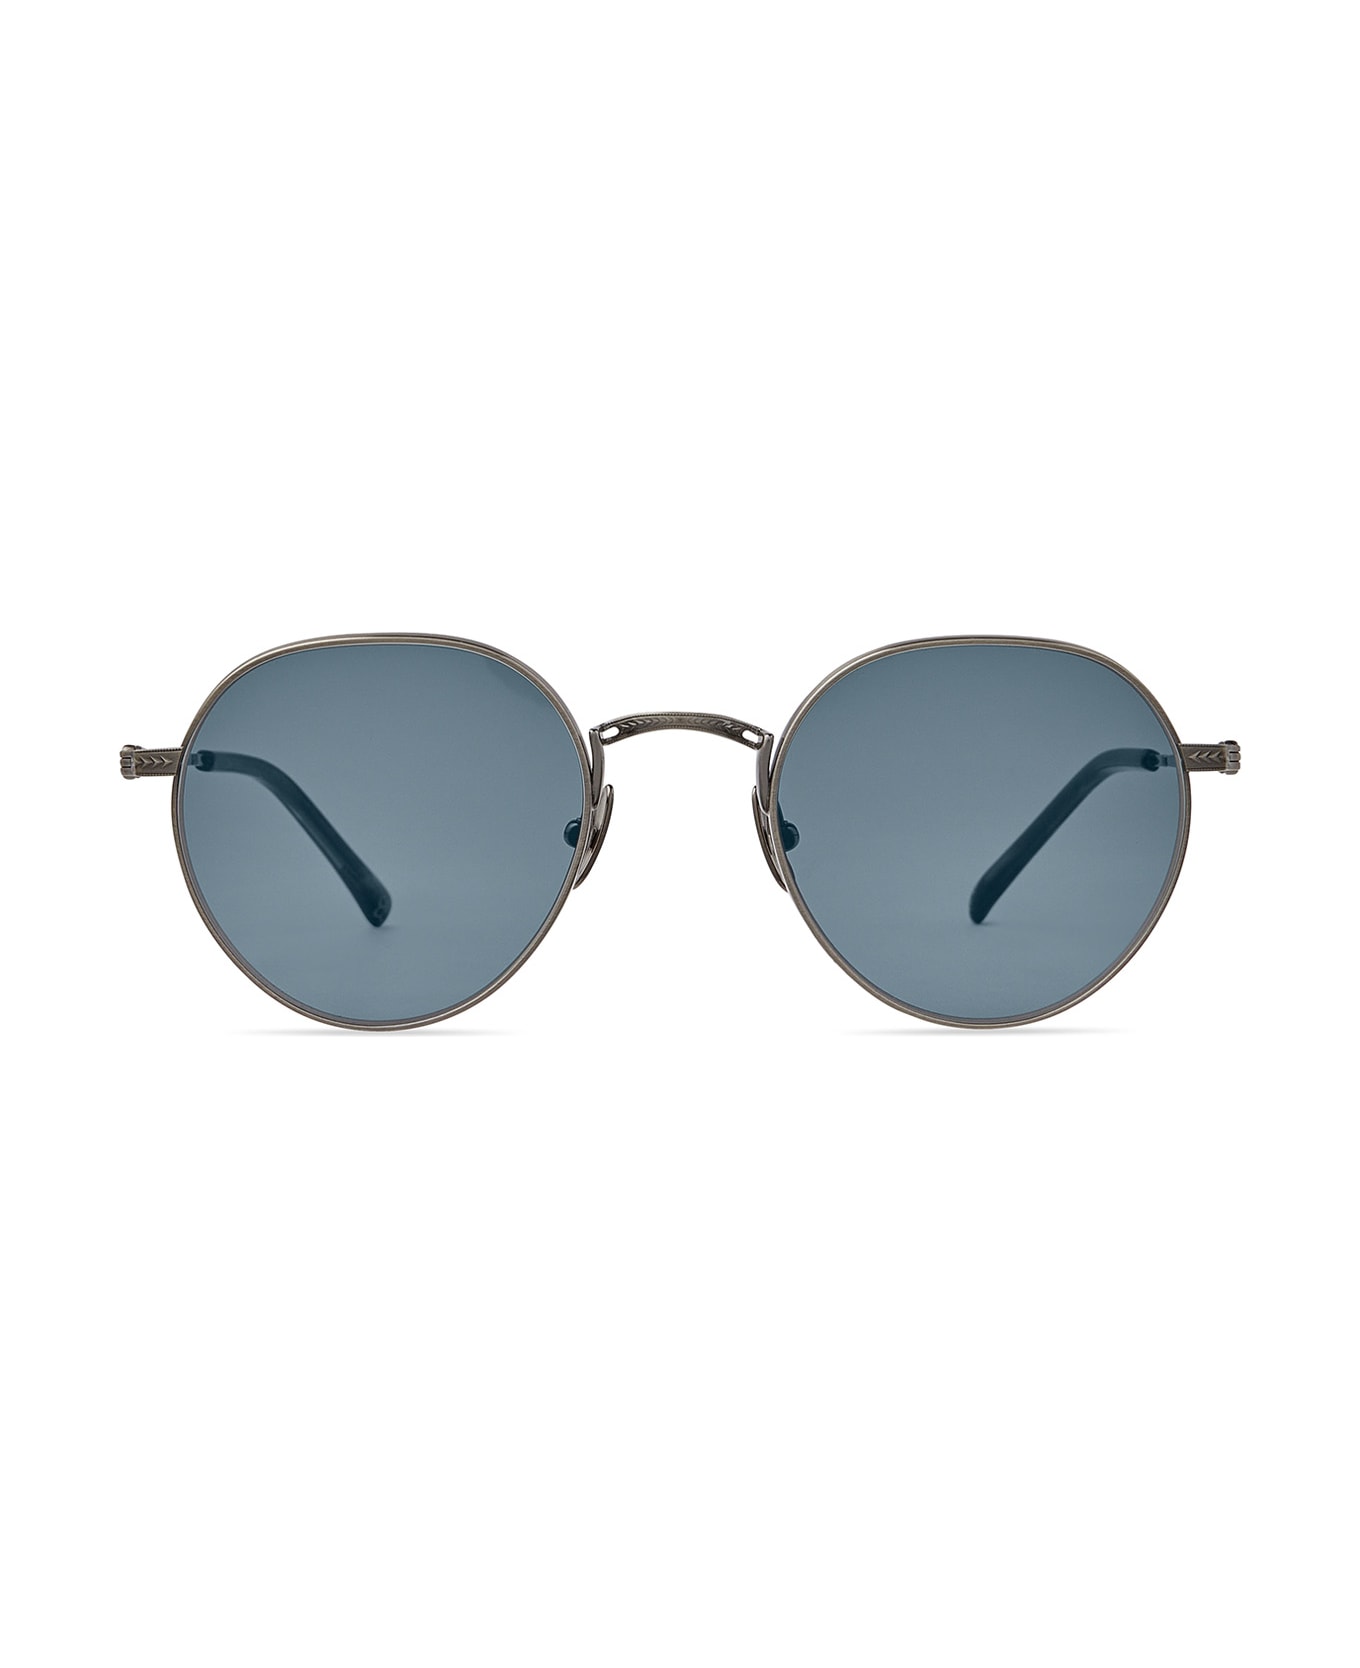 Mr. Leight Hachi S Pewter-matte Coldwater/semi-flat Presidential Blue Sunglasses - Pewter-Matte Coldwater/Semi-Flat Presidential Blue サングラス